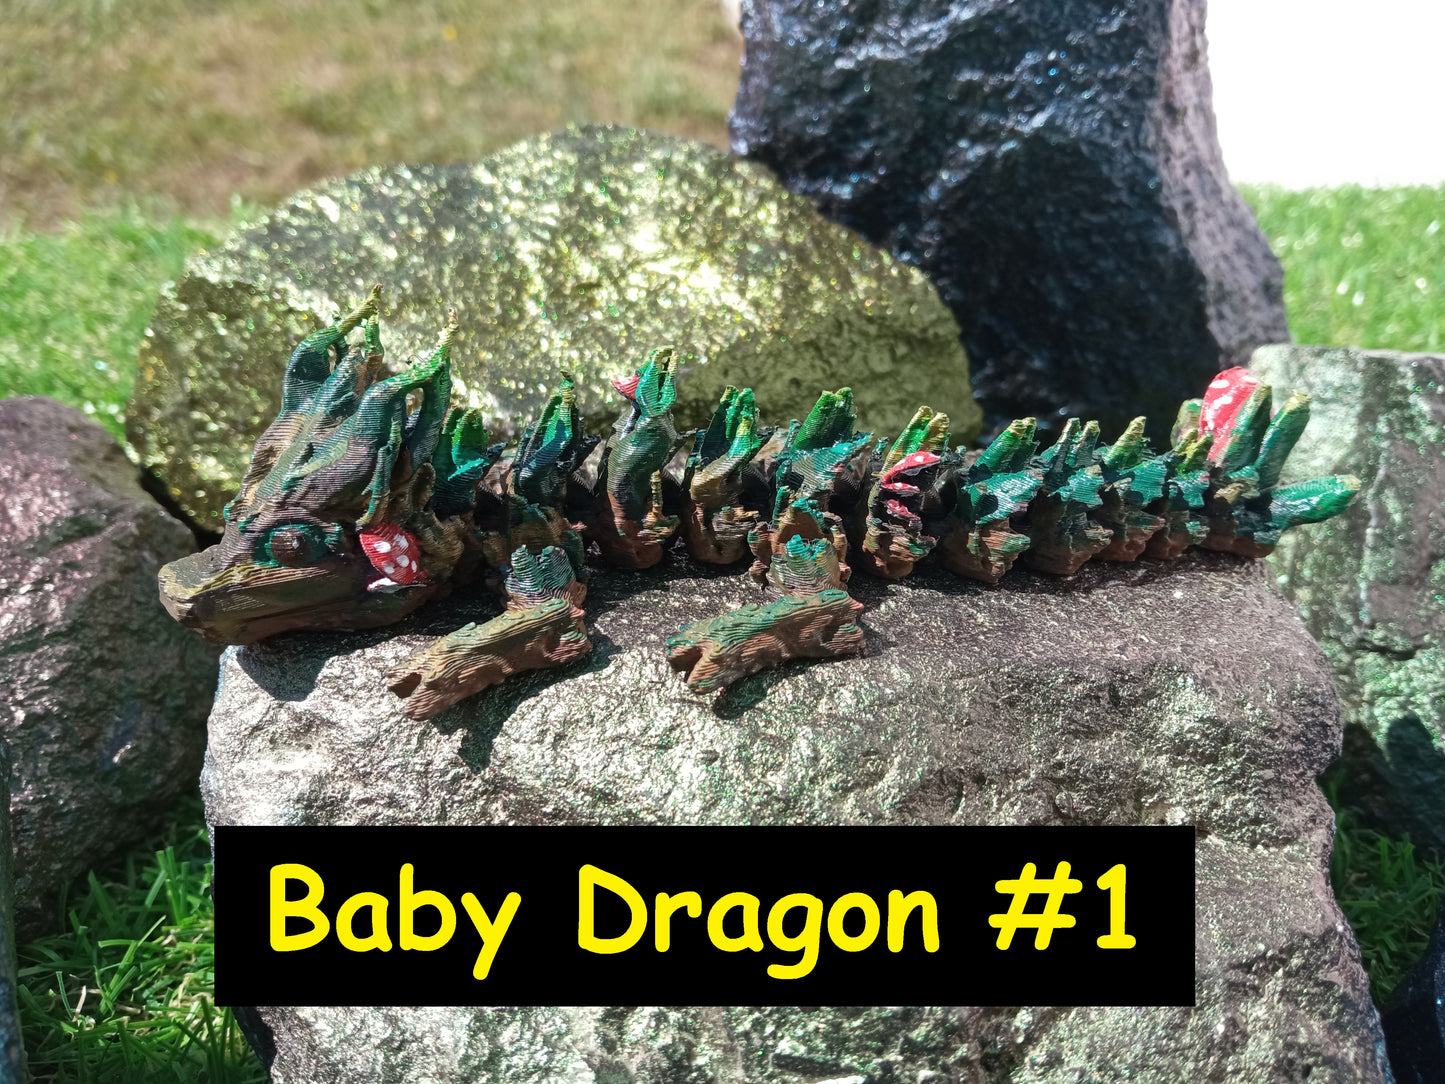 Enchanting baby forest dragons - your personal forest spirit